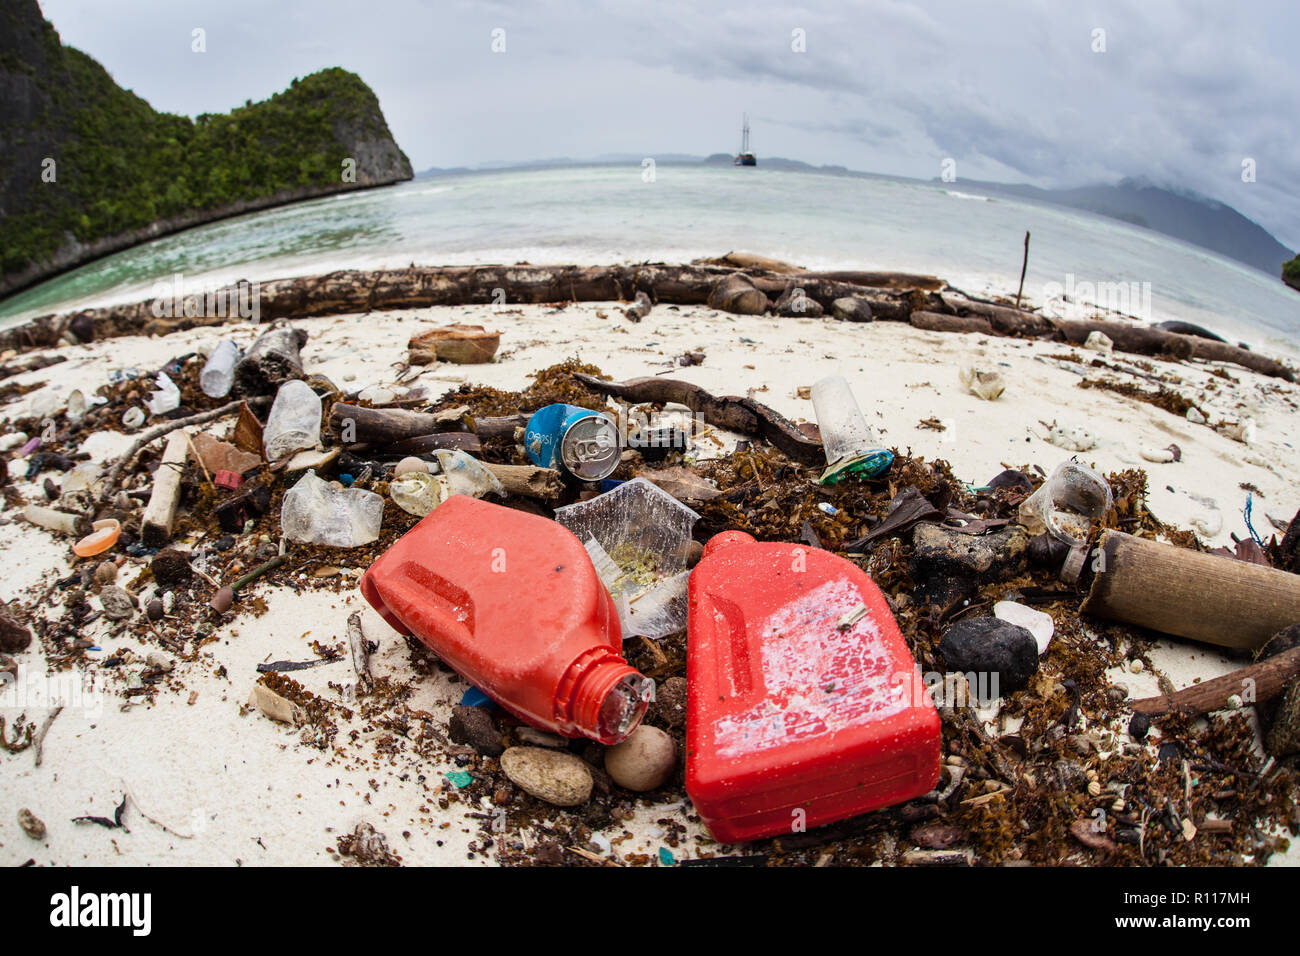 Discarded plastic bottles have washed up on a remote beach in Raja Ampat, Indonesia. Plastics break down into tiny pieces and enter the food chain. Stock Photo